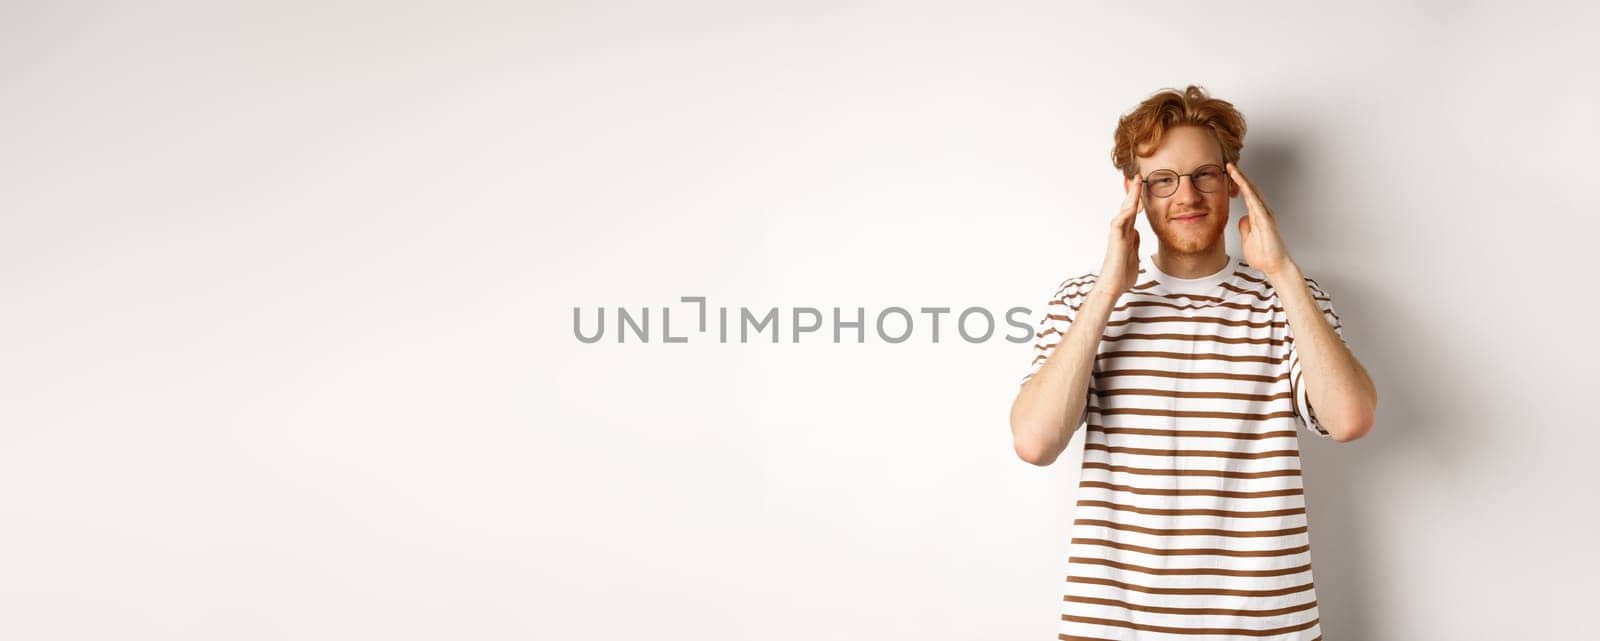 Handsome young man with hipster red hairstyle and glasses, smiling at camera, standing over white background.